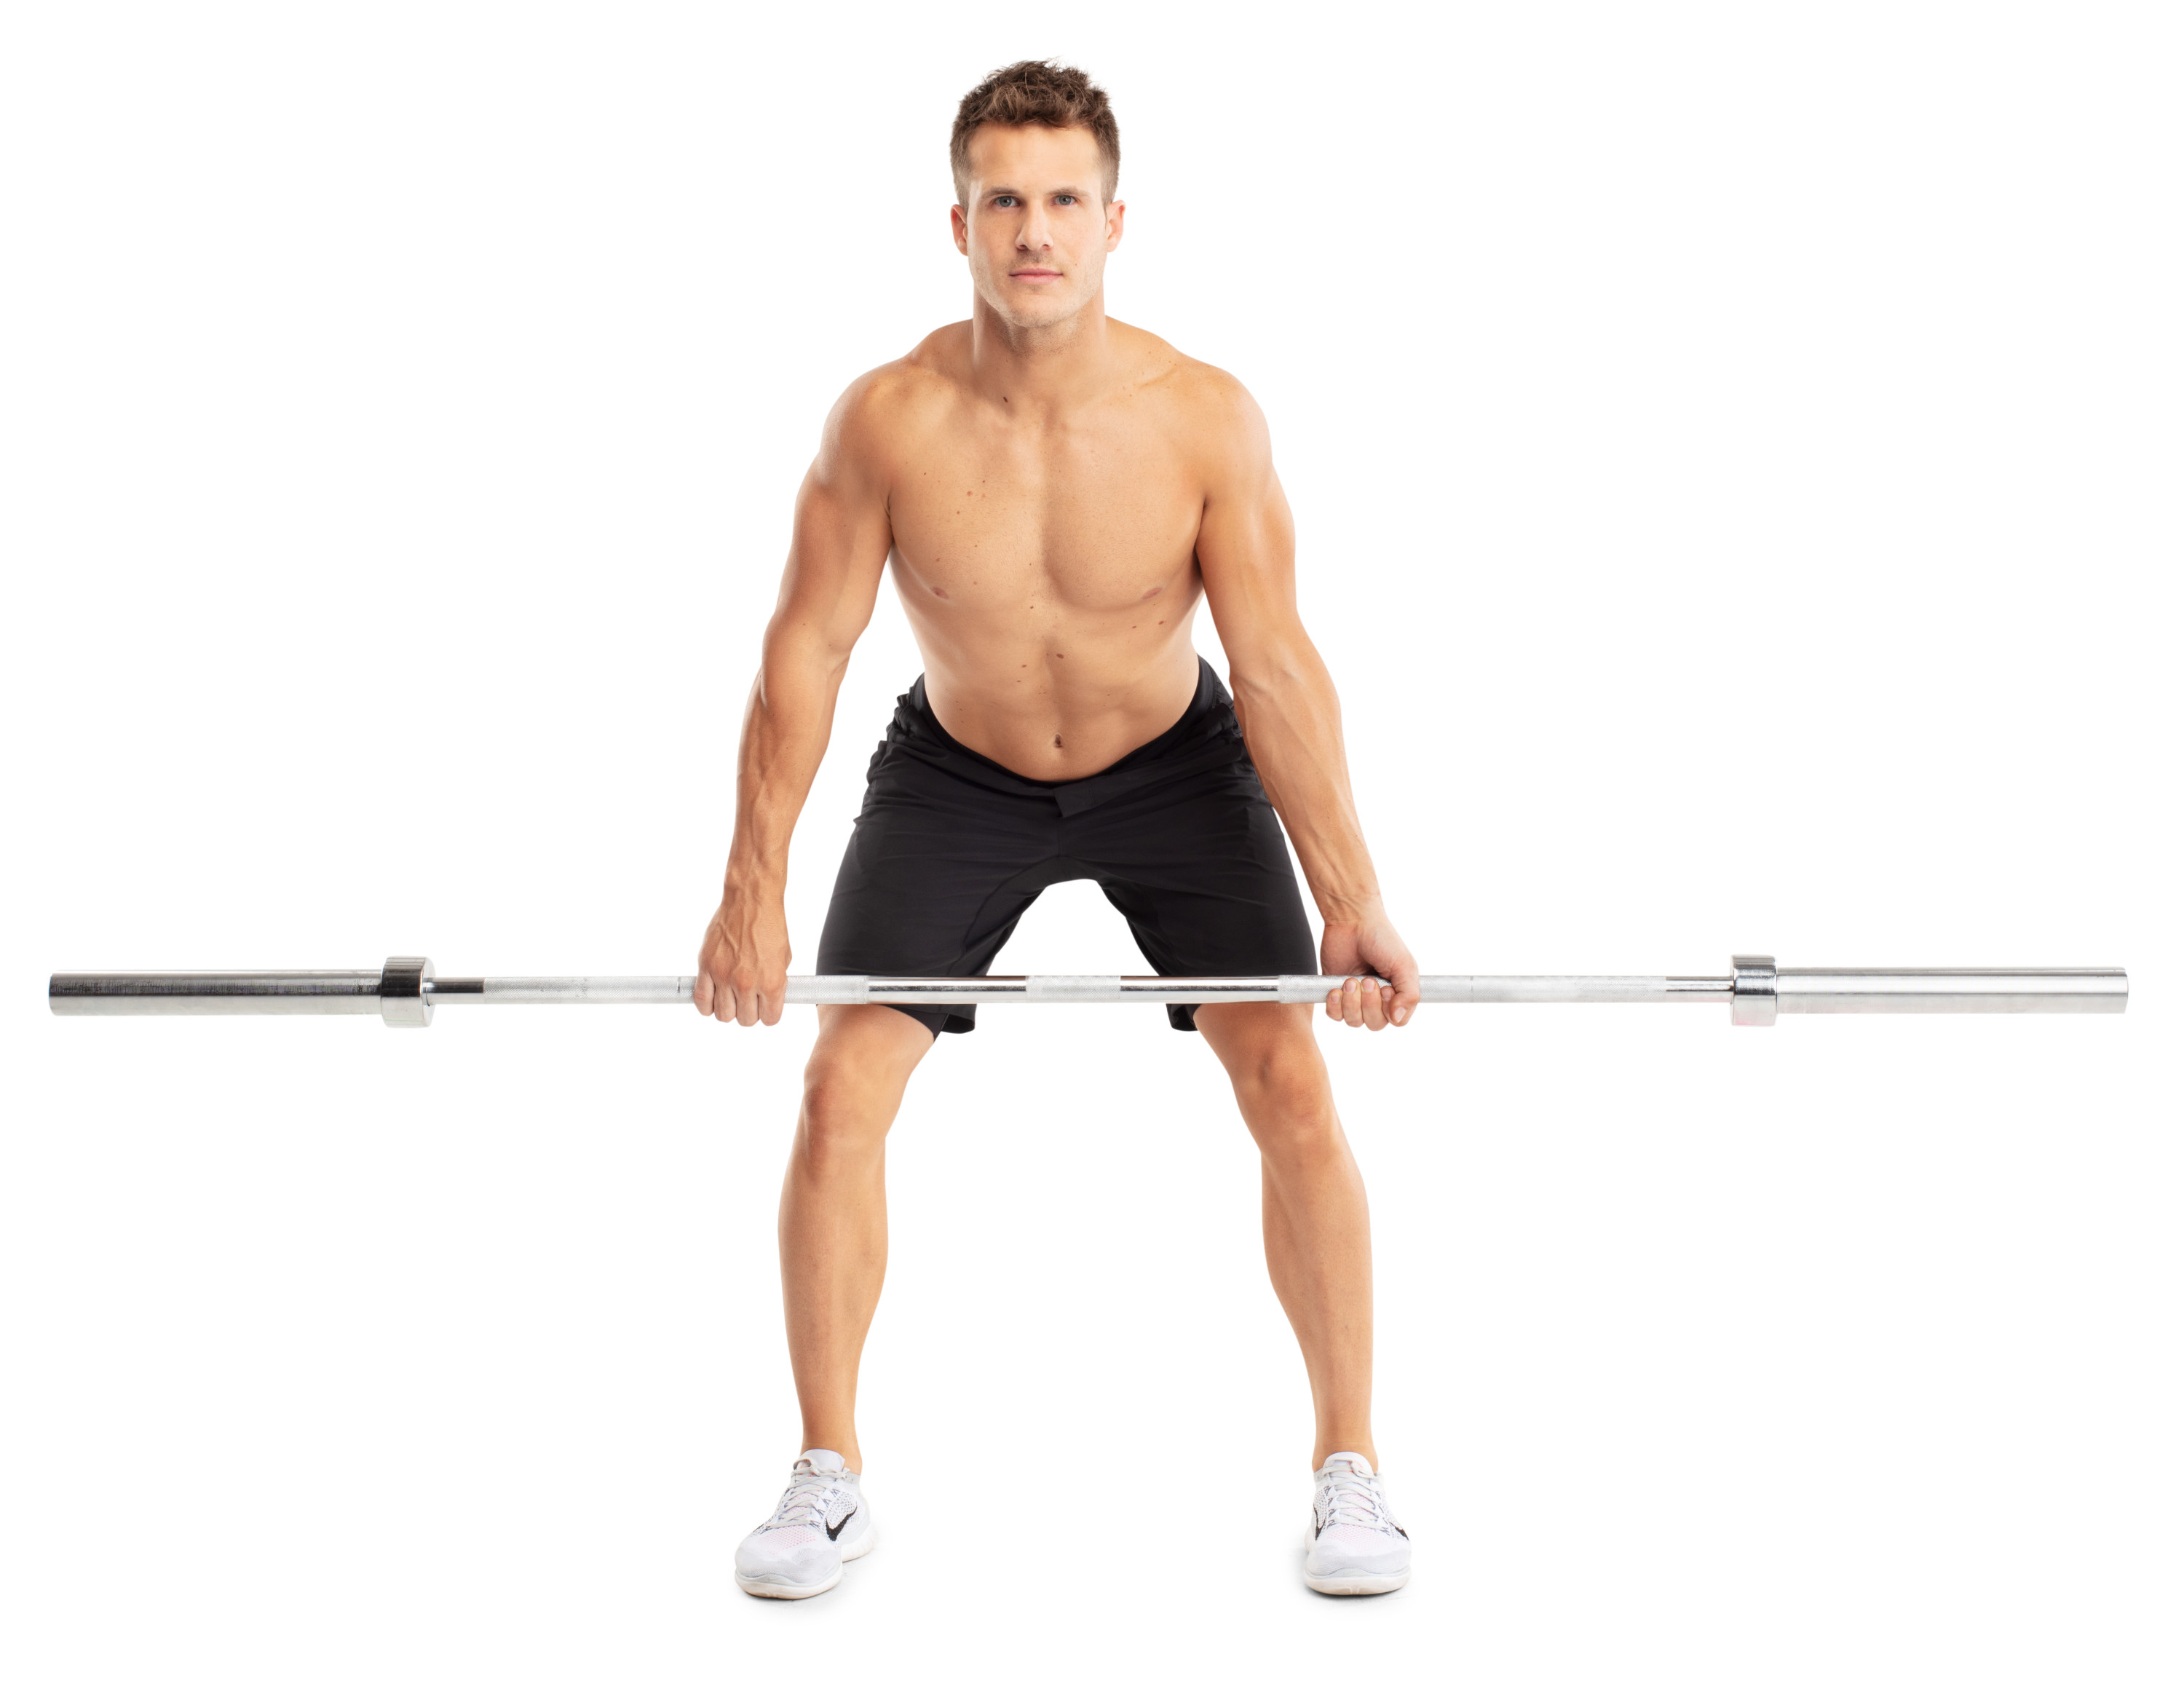 Weider 7 ft. Olympic-Sized Chrome Barbell with Partially Knurled Grip, 310 lb. Weight Capacity - image 4 of 5